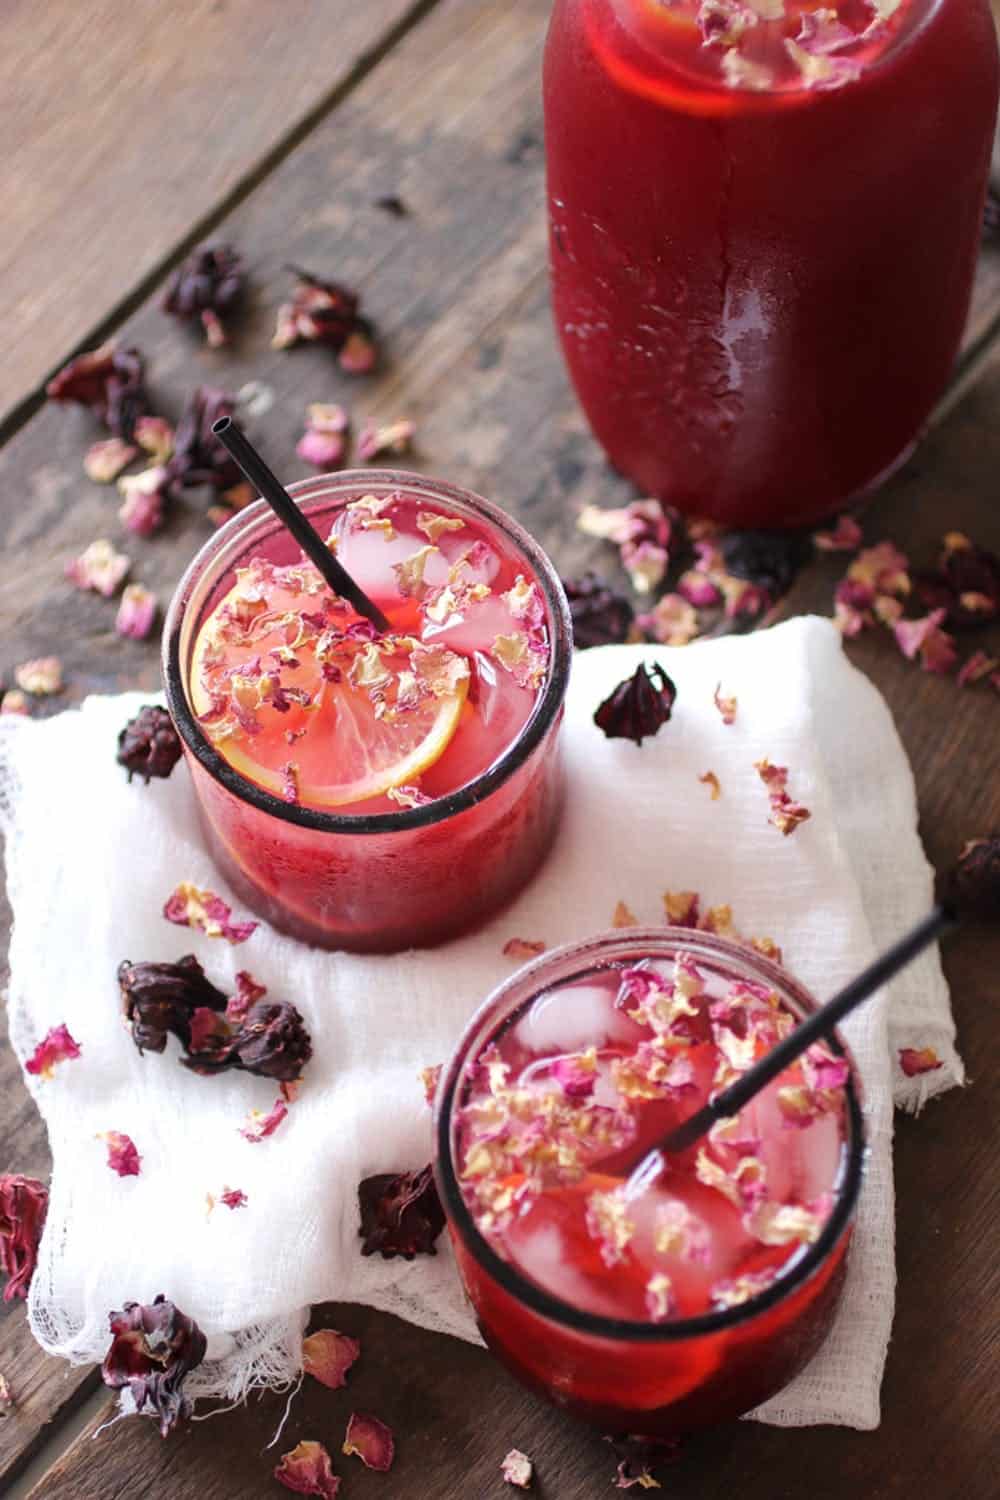 Hibiscus and rose iced tea